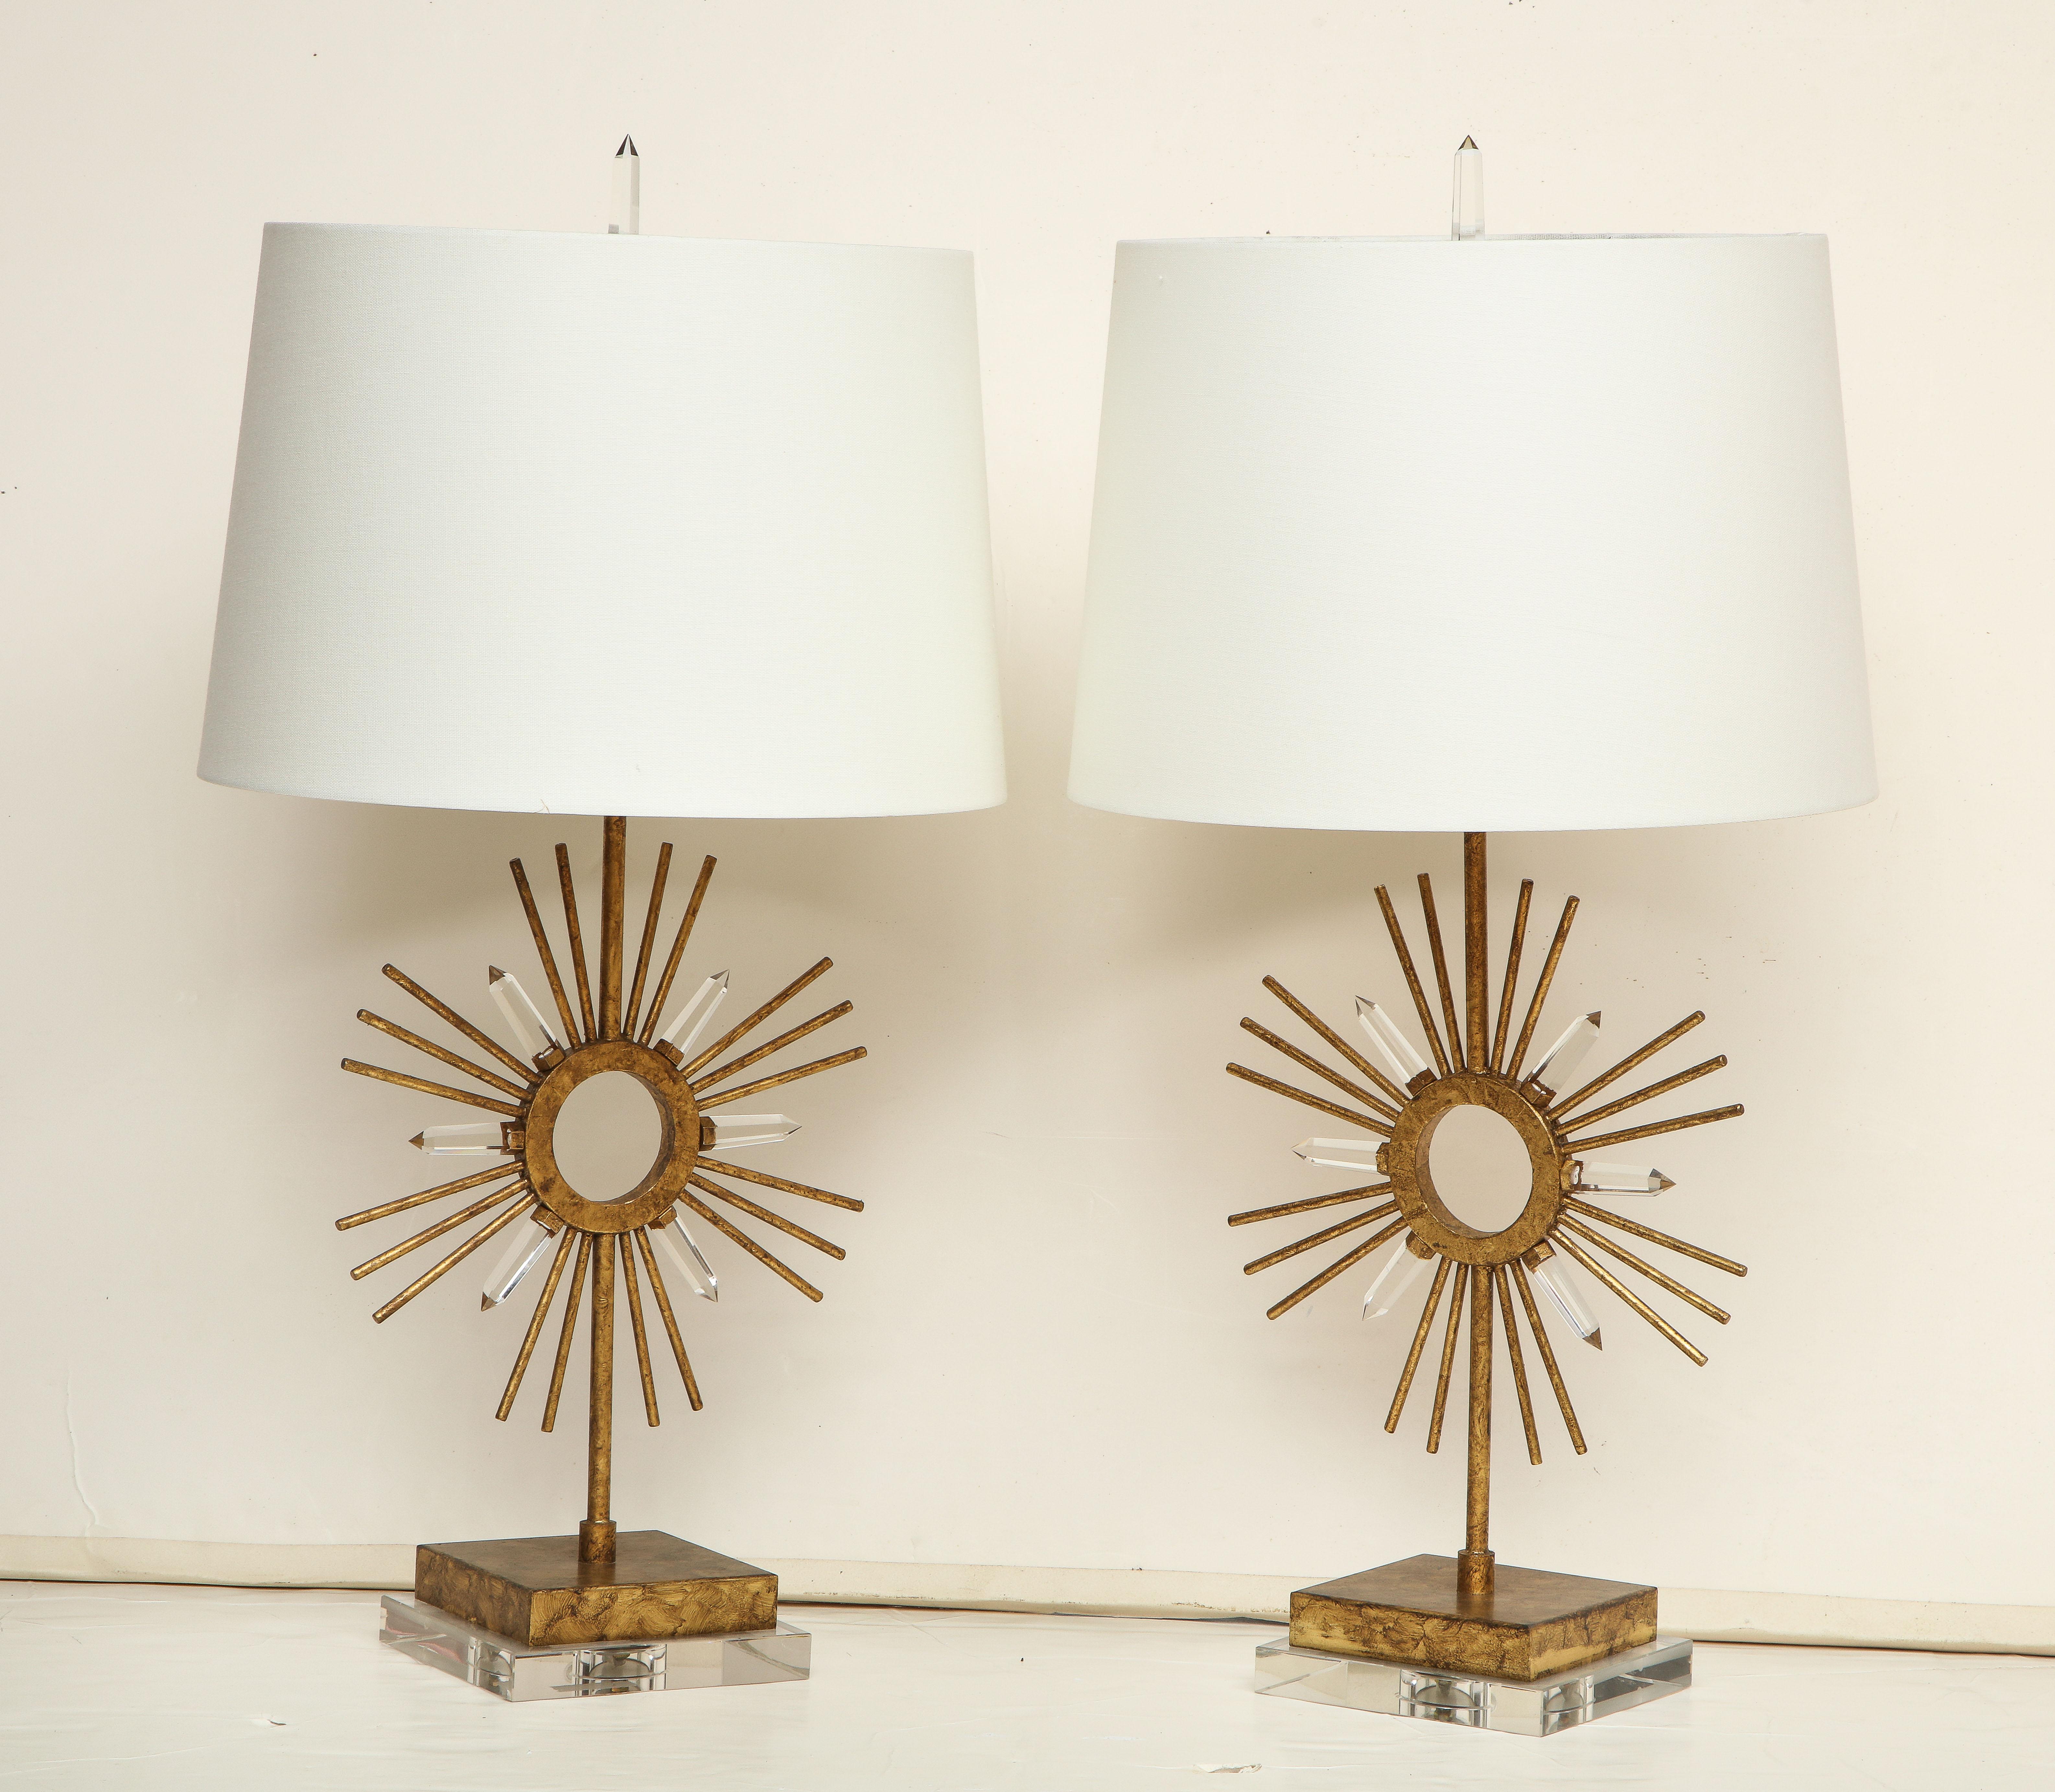 A pair of striking gilt metal lamps with a sunburst decoration on a Lucite base. Priced at $850 per lamps.